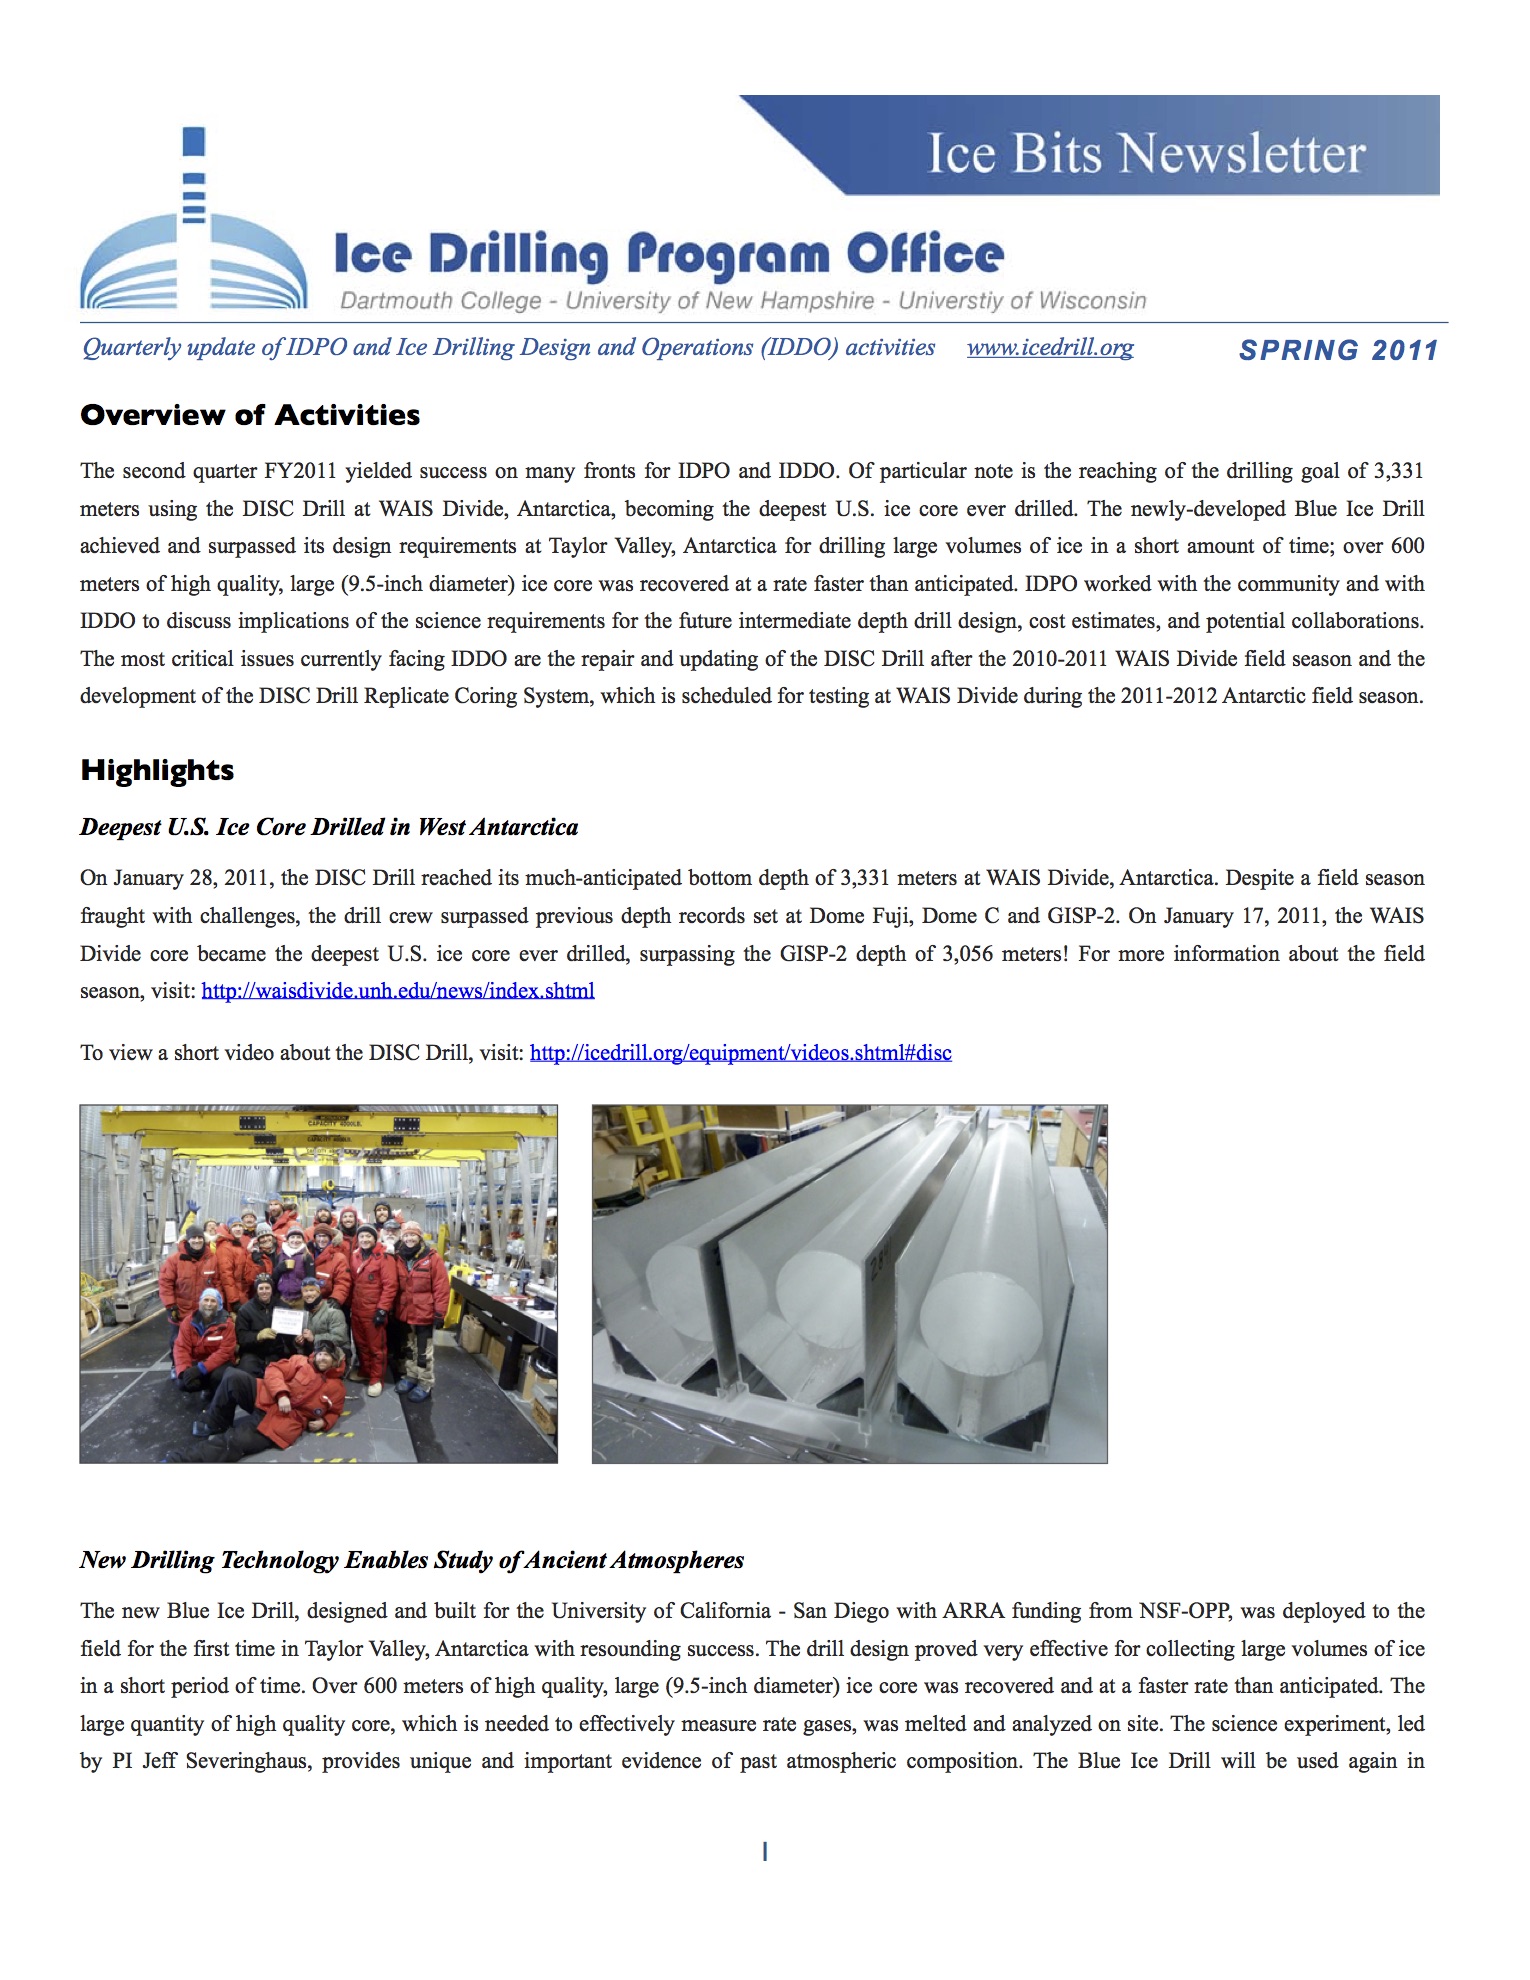 Cover of the Ice Bits newsletter